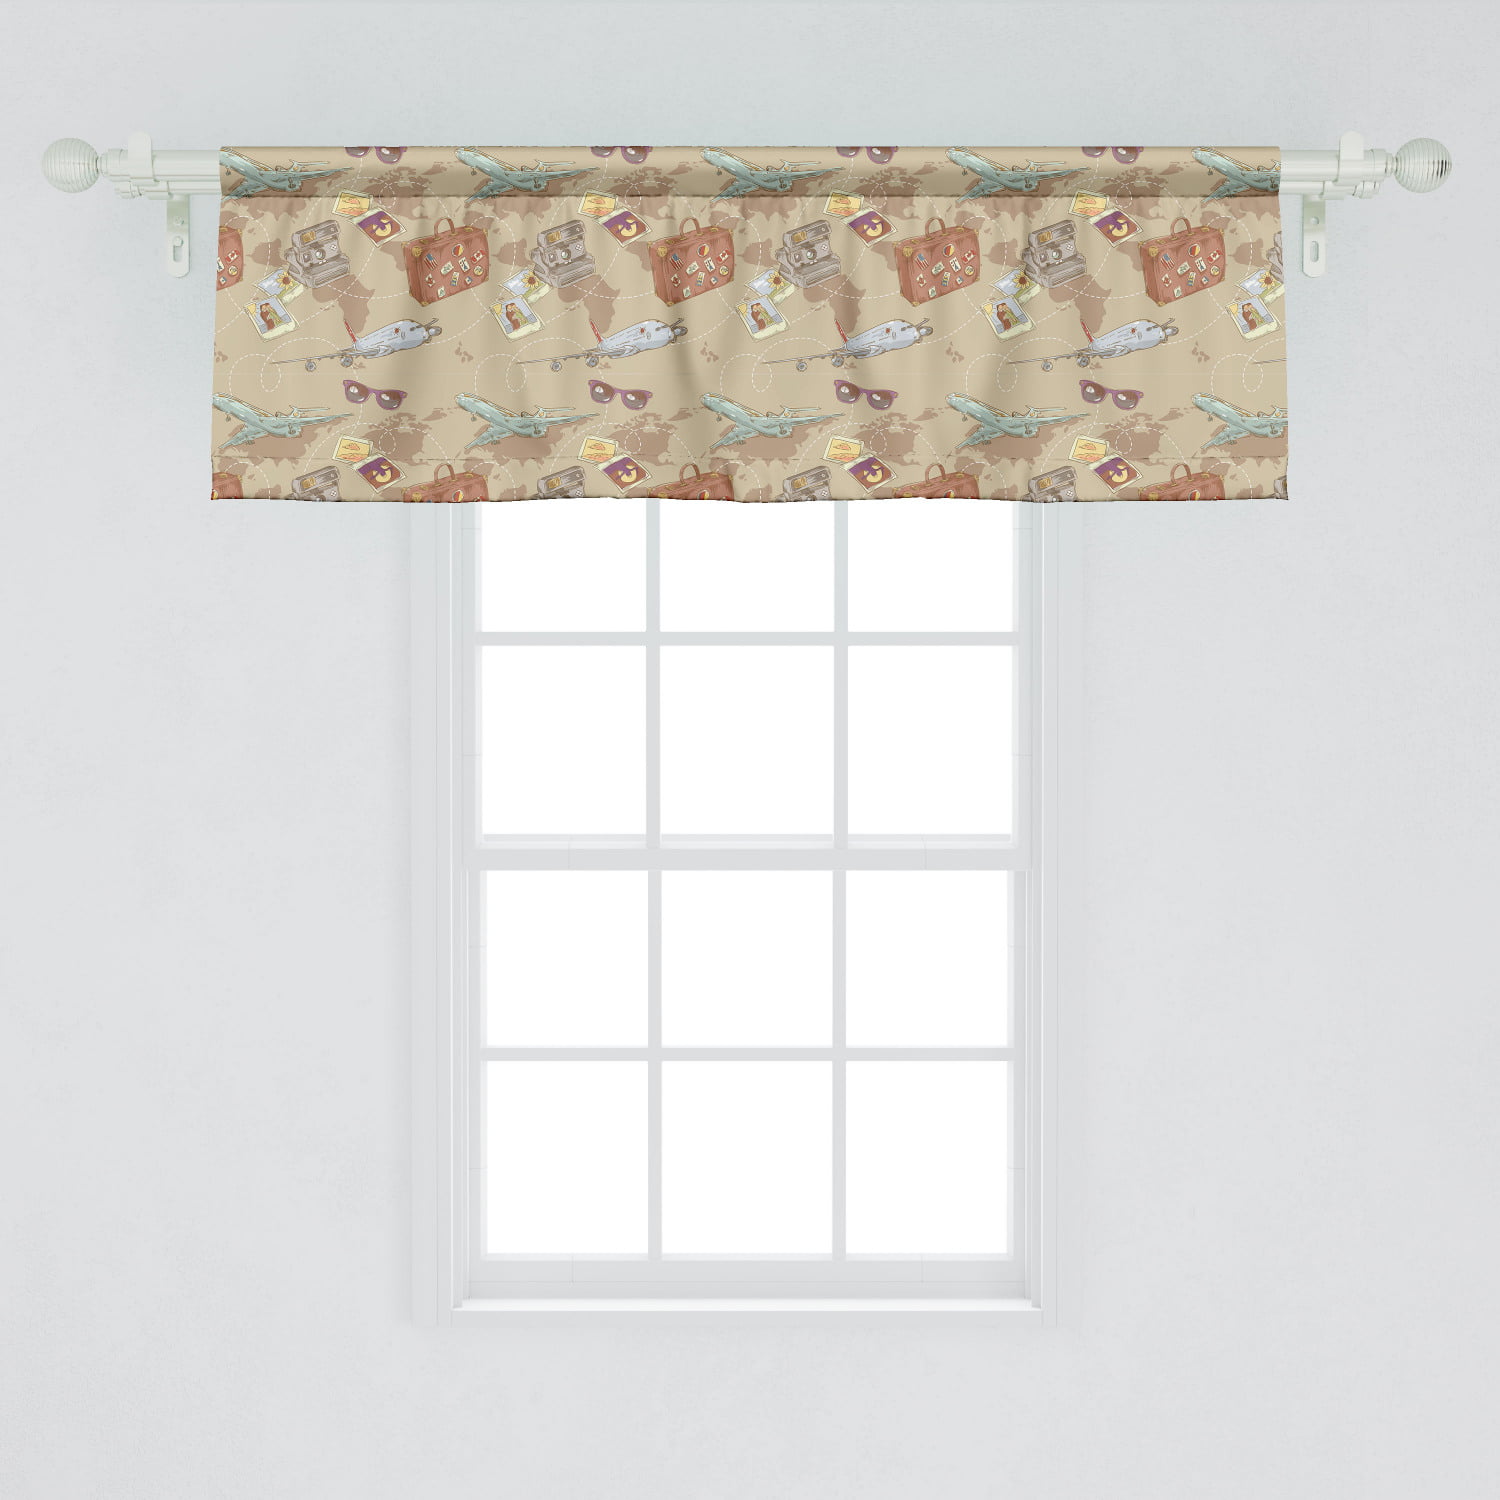 Ambesonne Travel Window Valance, Repeating Pattern with Plane Bag Camera  and World Map Vintage Retro Style Print, Curtain Valance for Kitchen  Bedroom ...